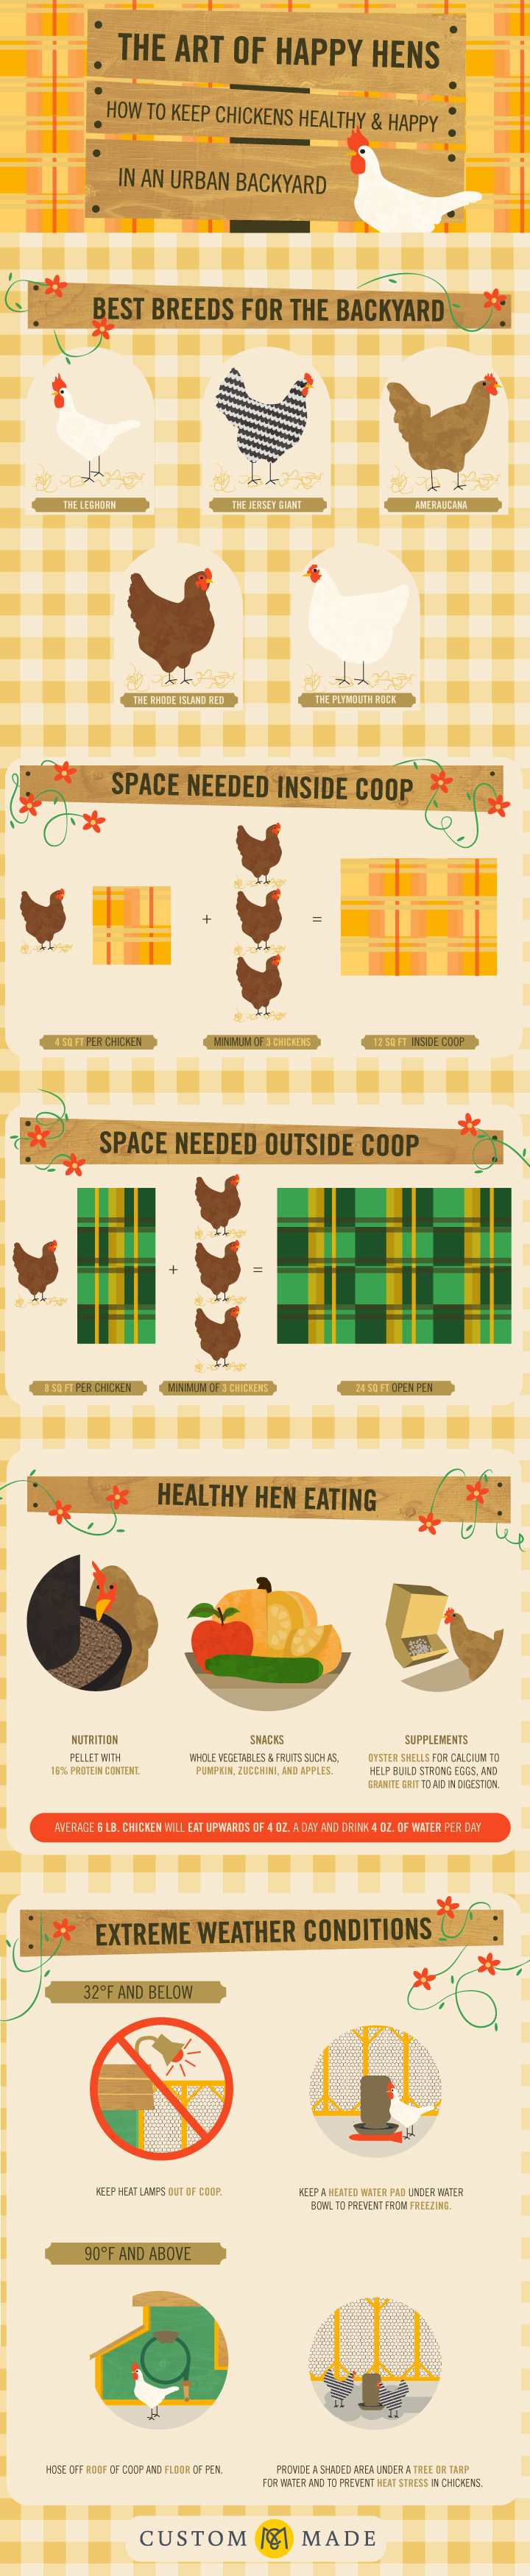 The Art of Happy Hens — How to Keep Chickens Healthy and Happy in An Urban Backyard